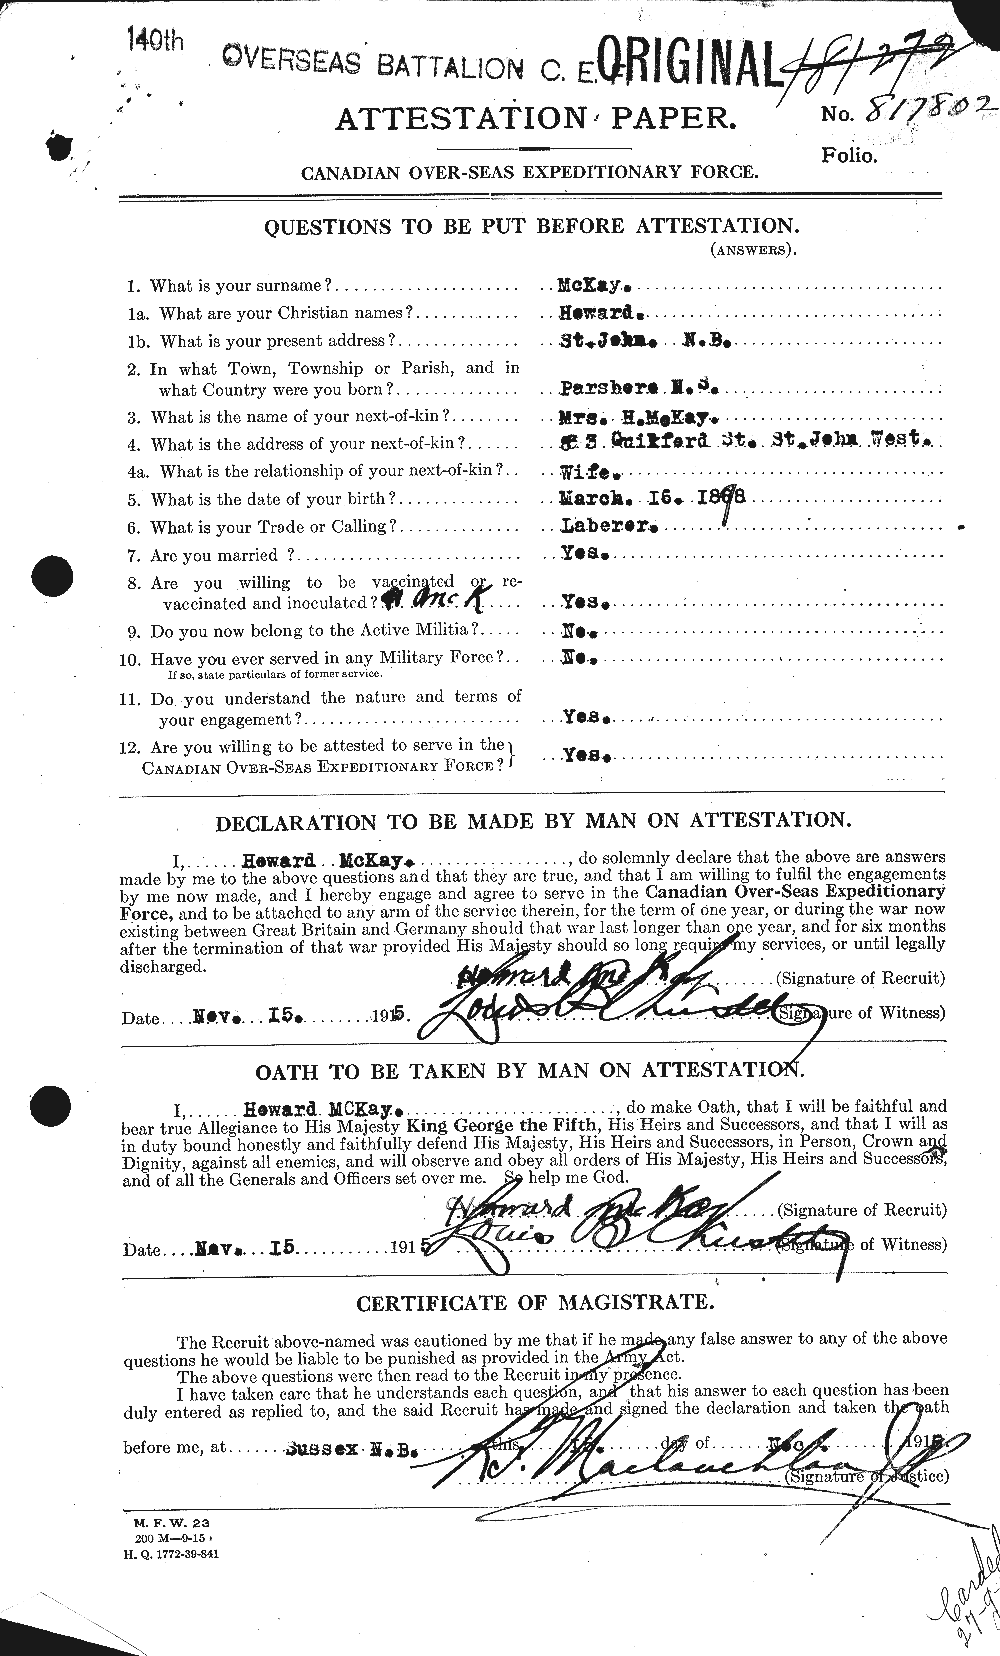 Personnel Records of the First World War - CEF 534751a